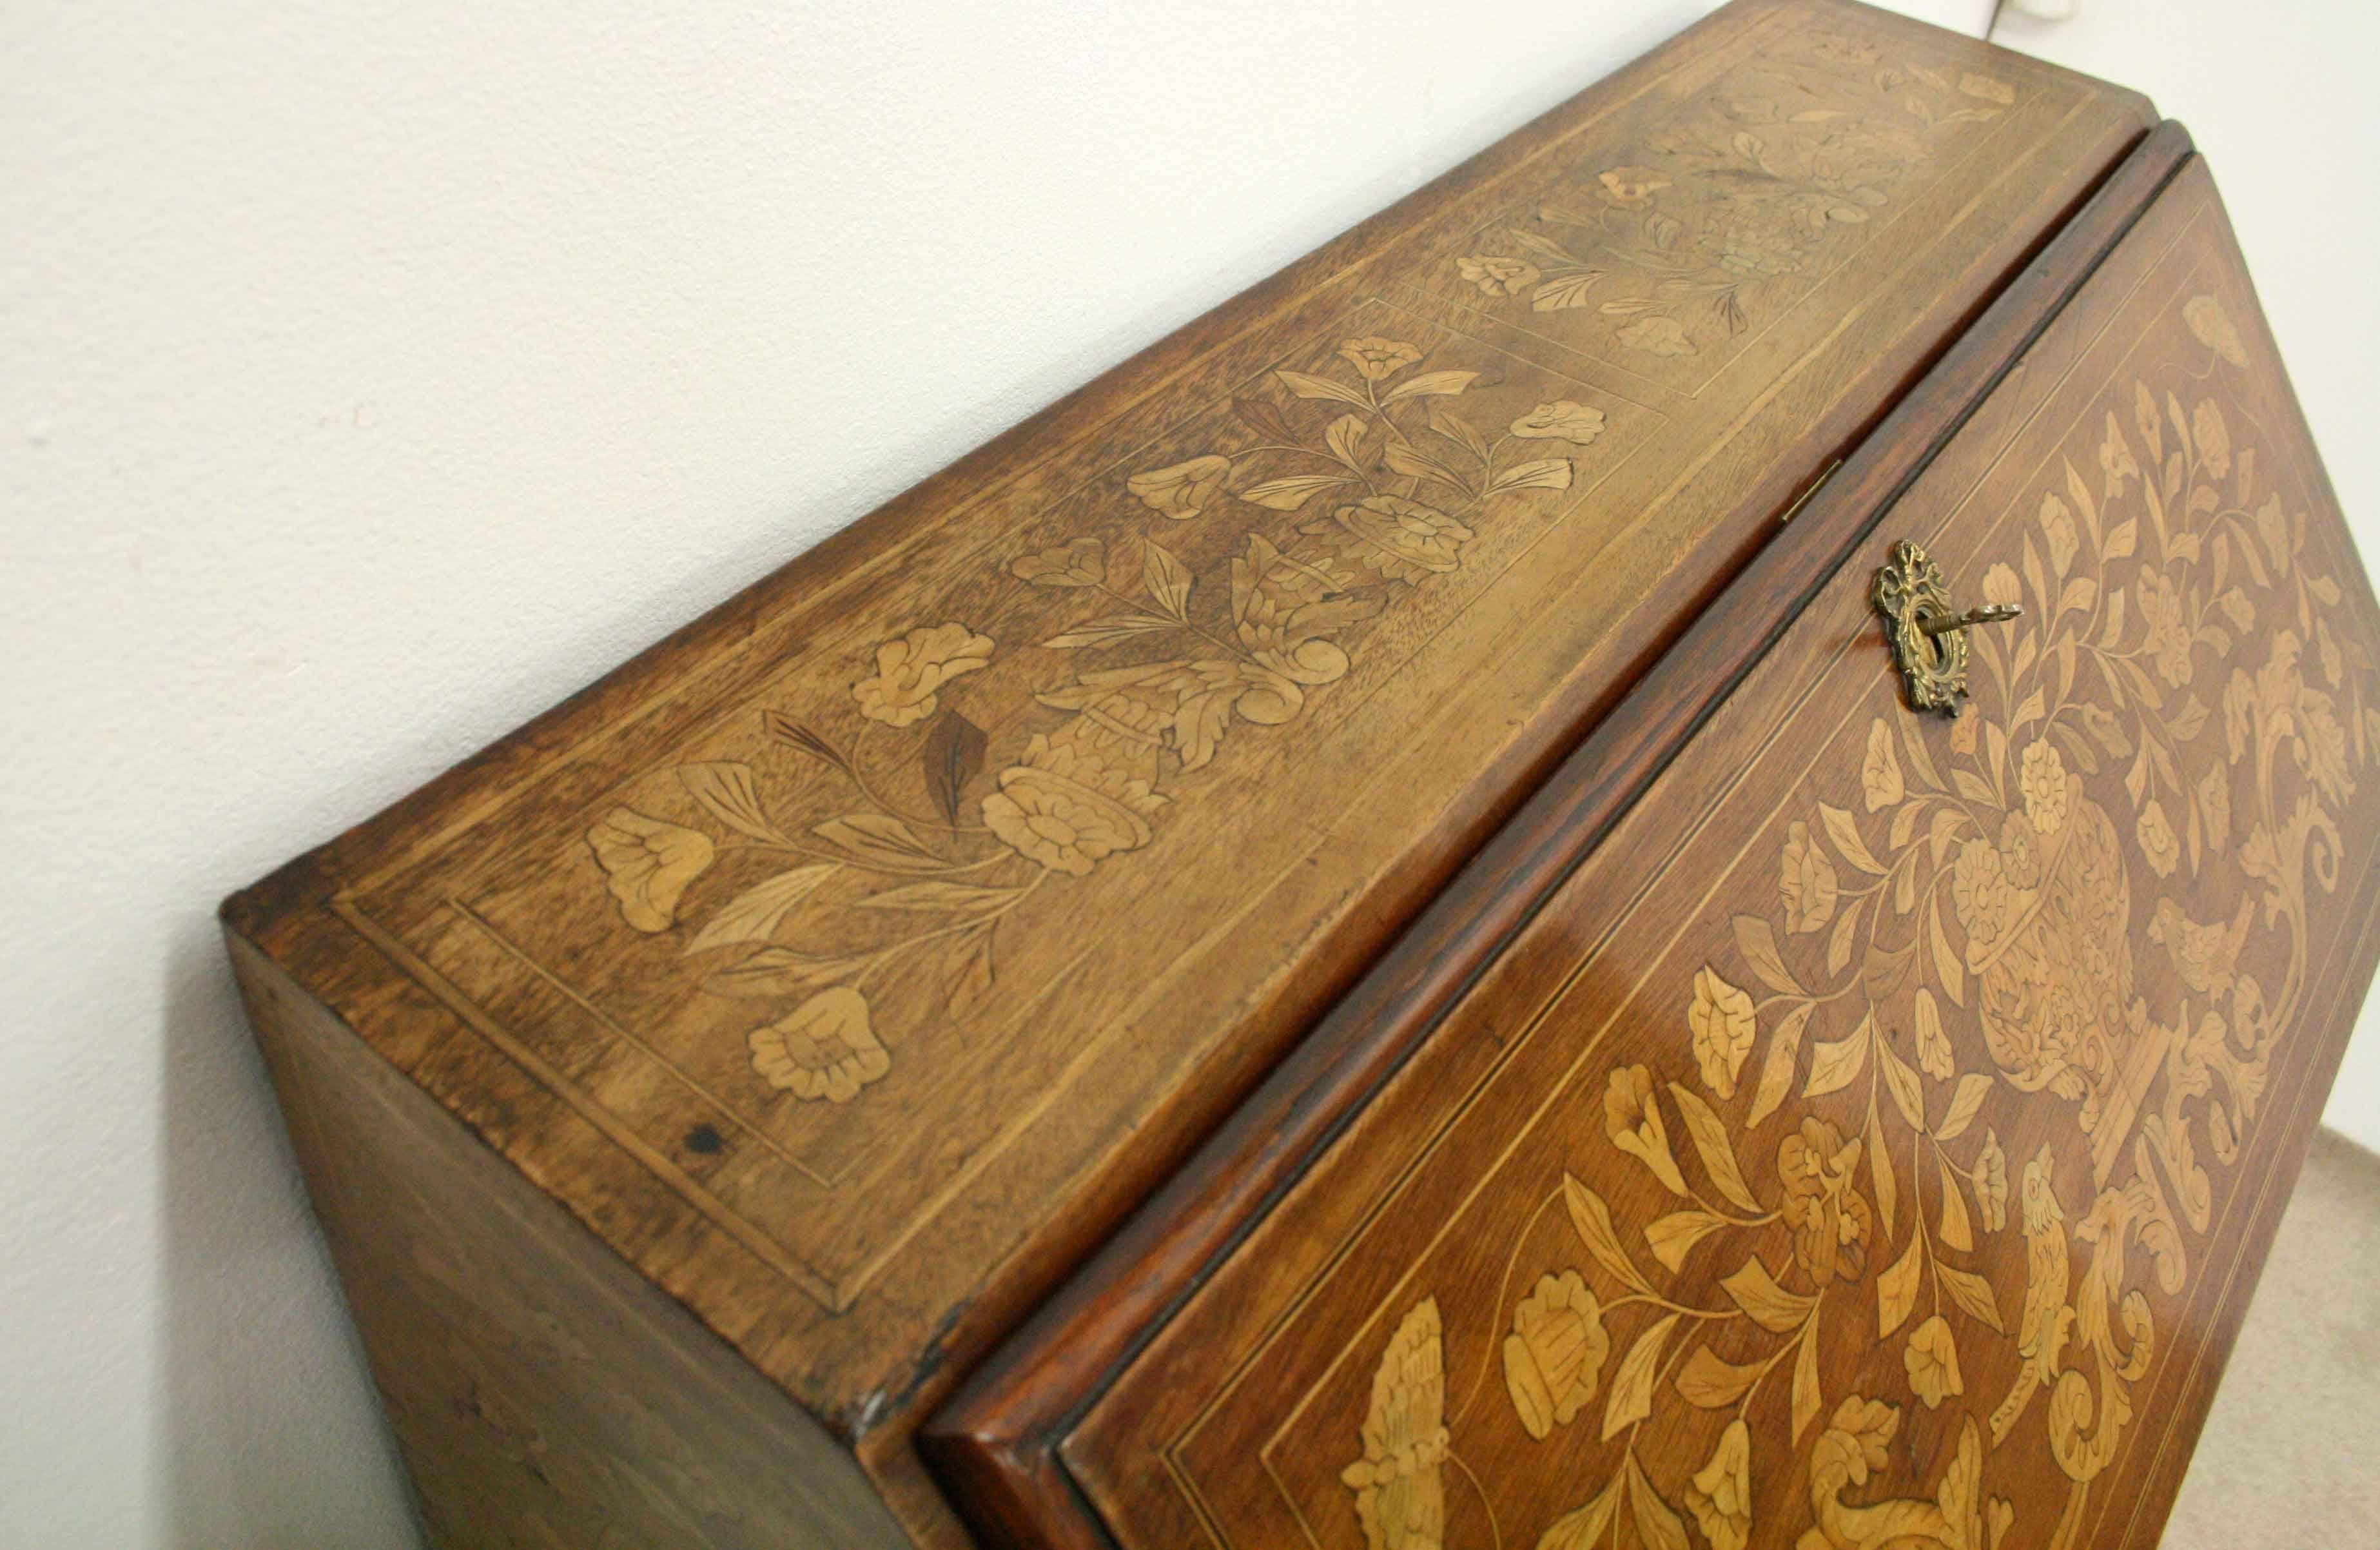 Dutch walnut marquetry inlaid bureau, circa 1860. The flap has a large marquetry urn with flowers spilling out of it at both sides, butterflies and birds. There is a very stylish cast brass gilded escutcheon with the aperture for the key and swags